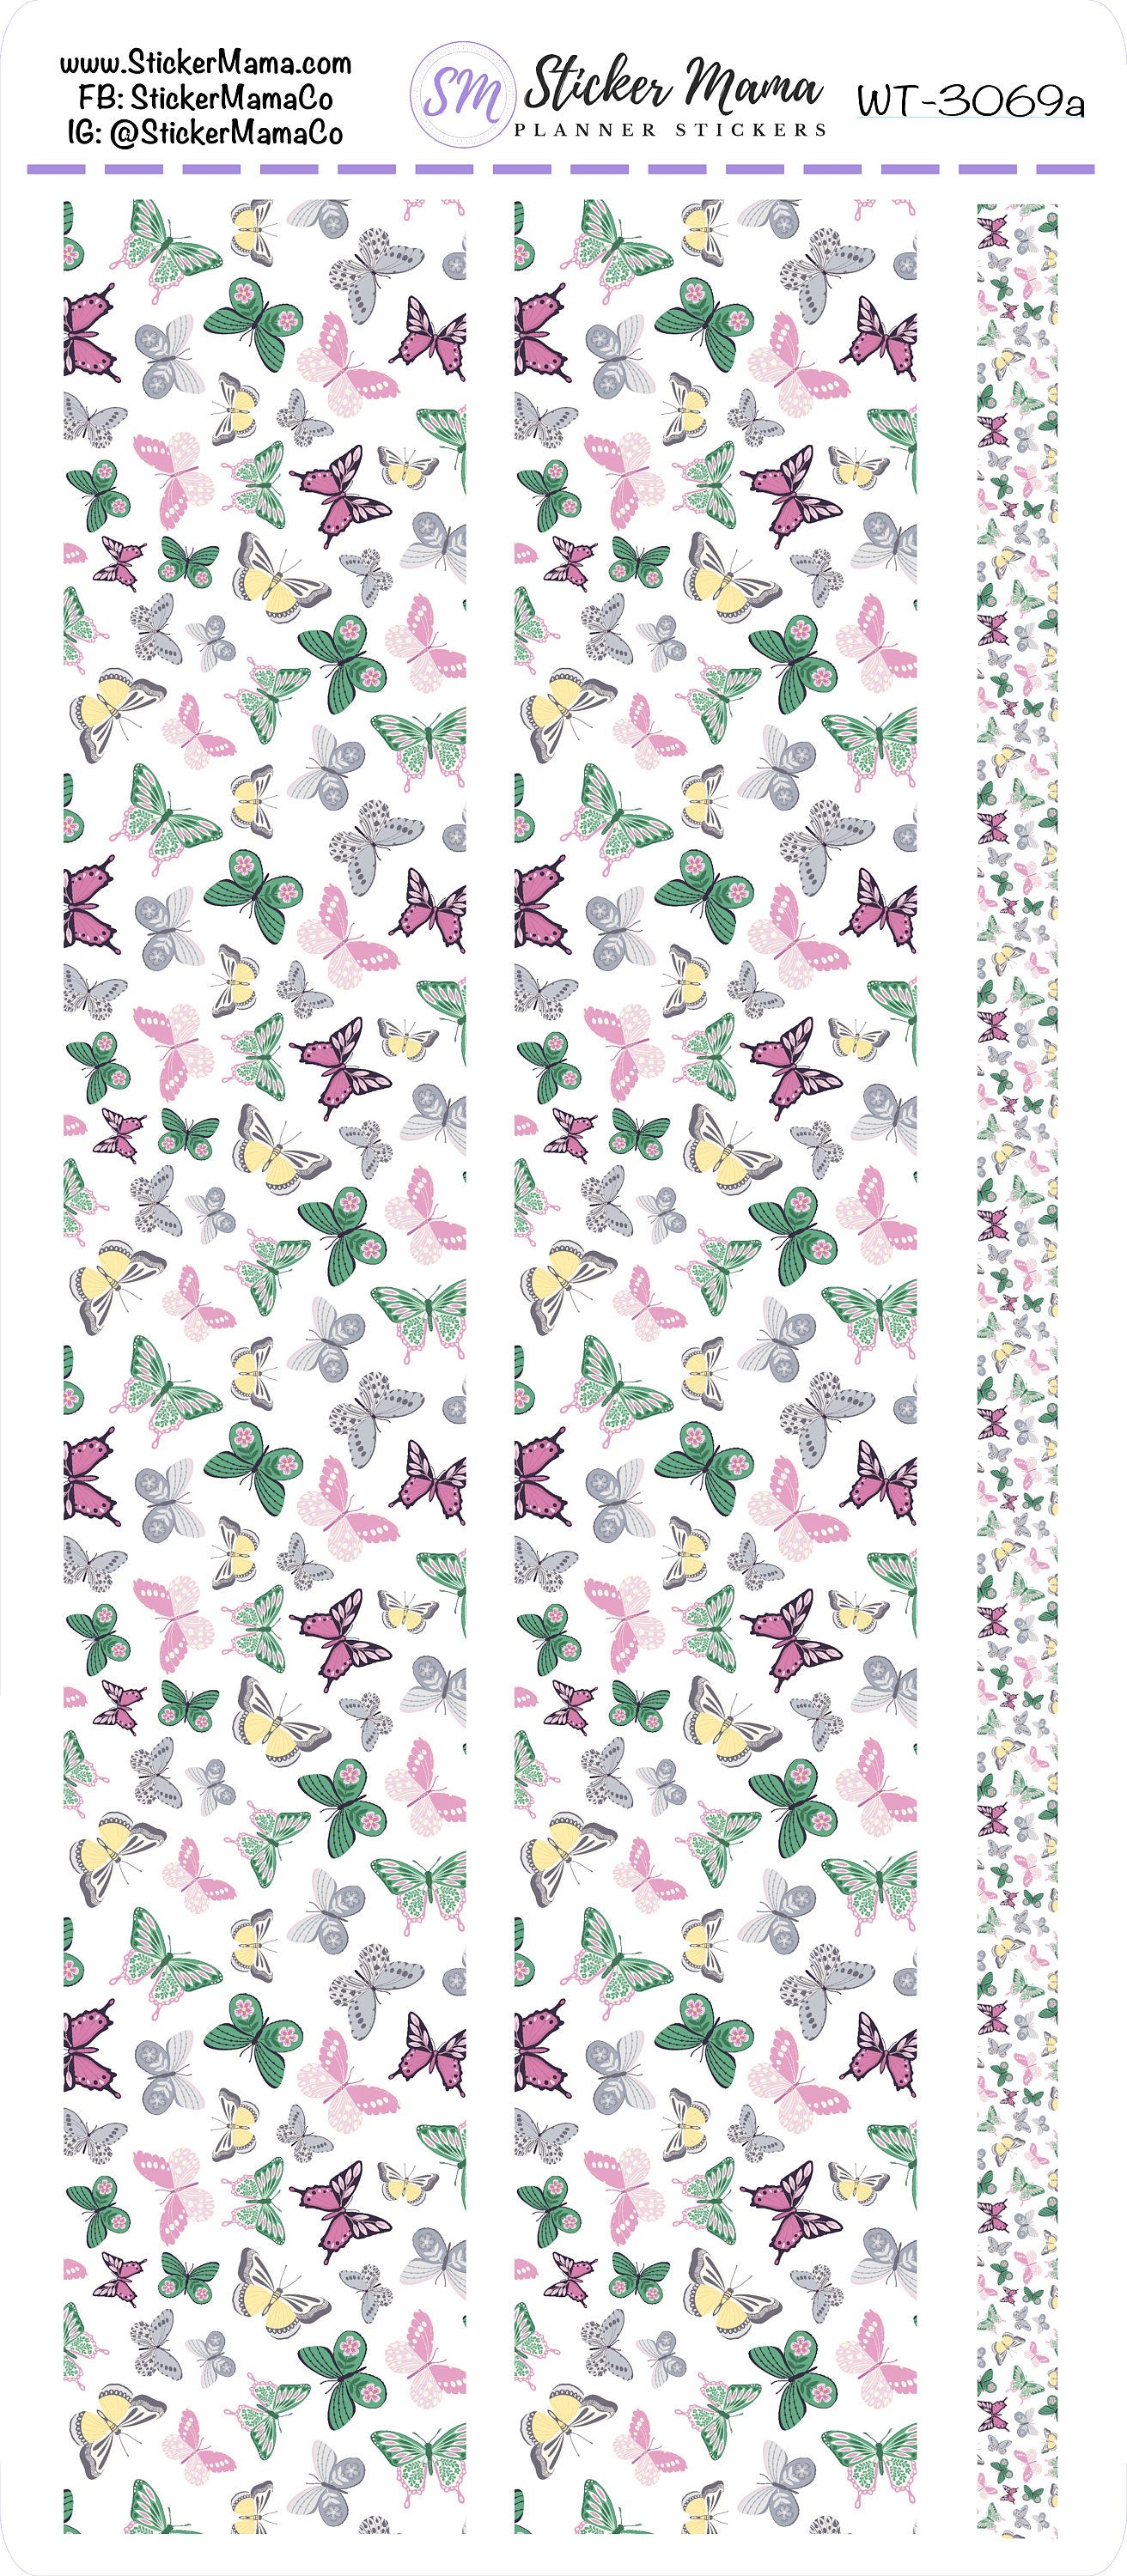 W-3069 - WASHI STICKERS - Butterflies - Planner Stickers - Washi for Planners